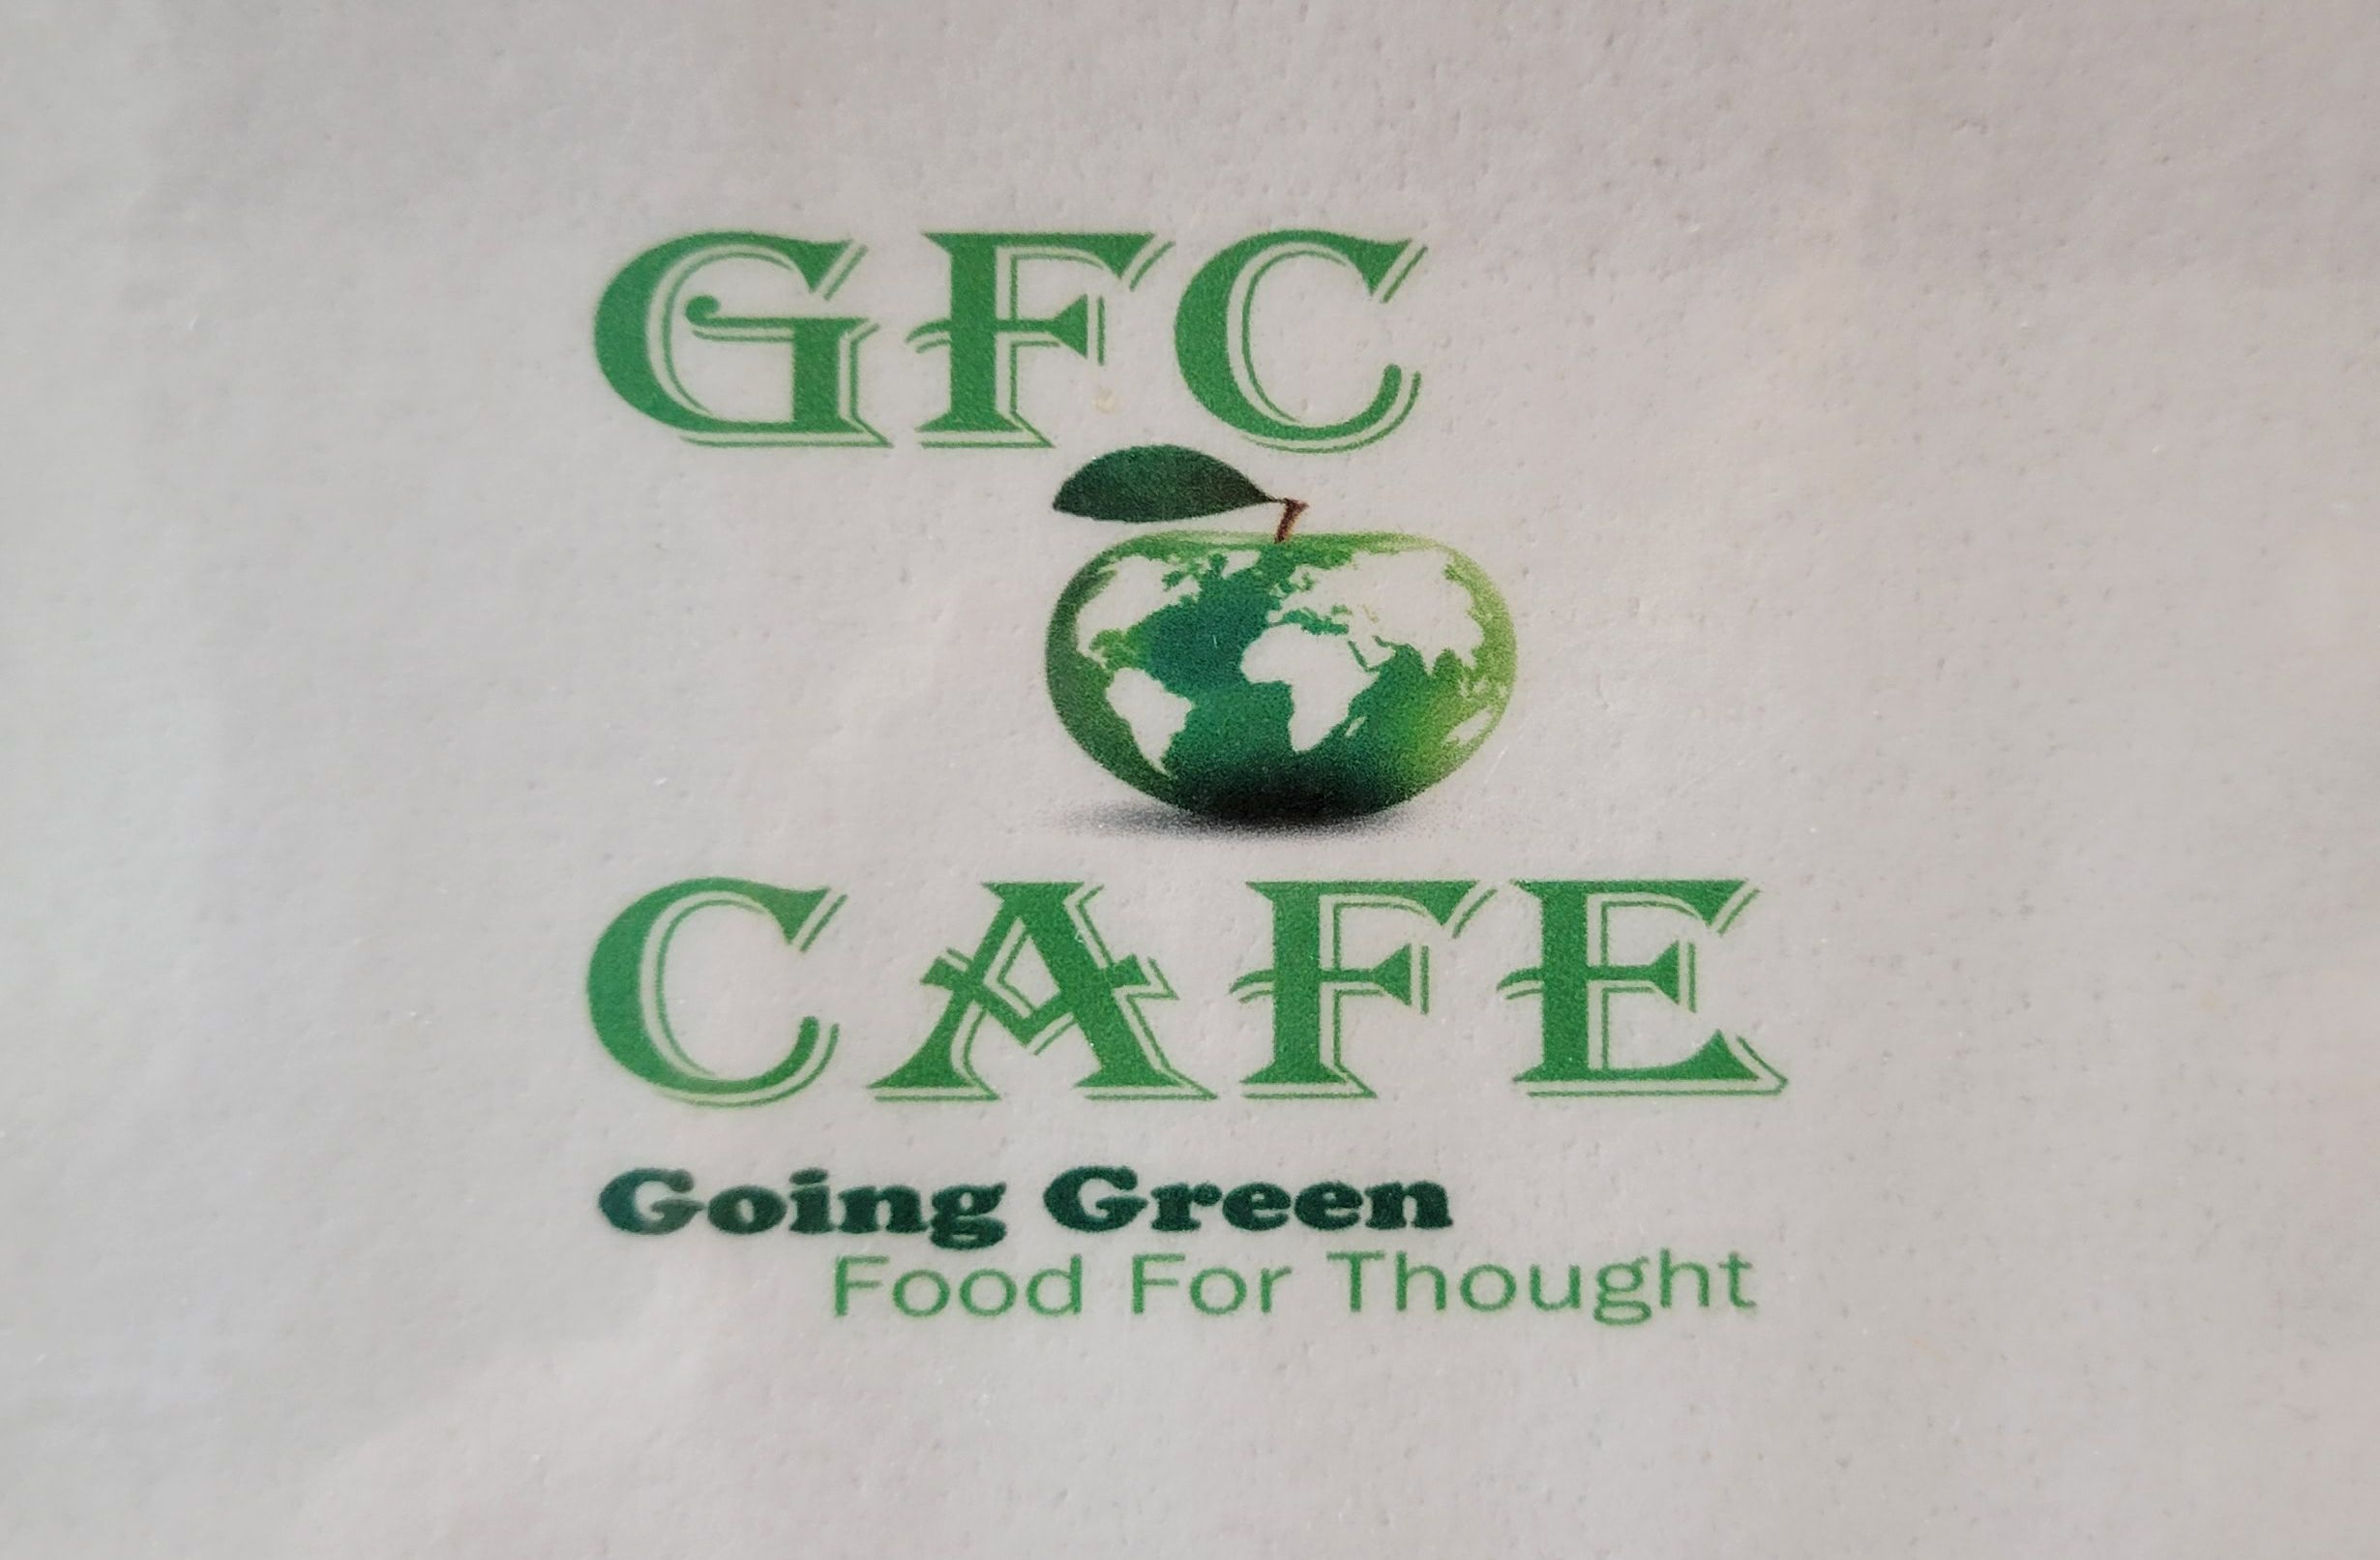 Griffis cafe going green logo